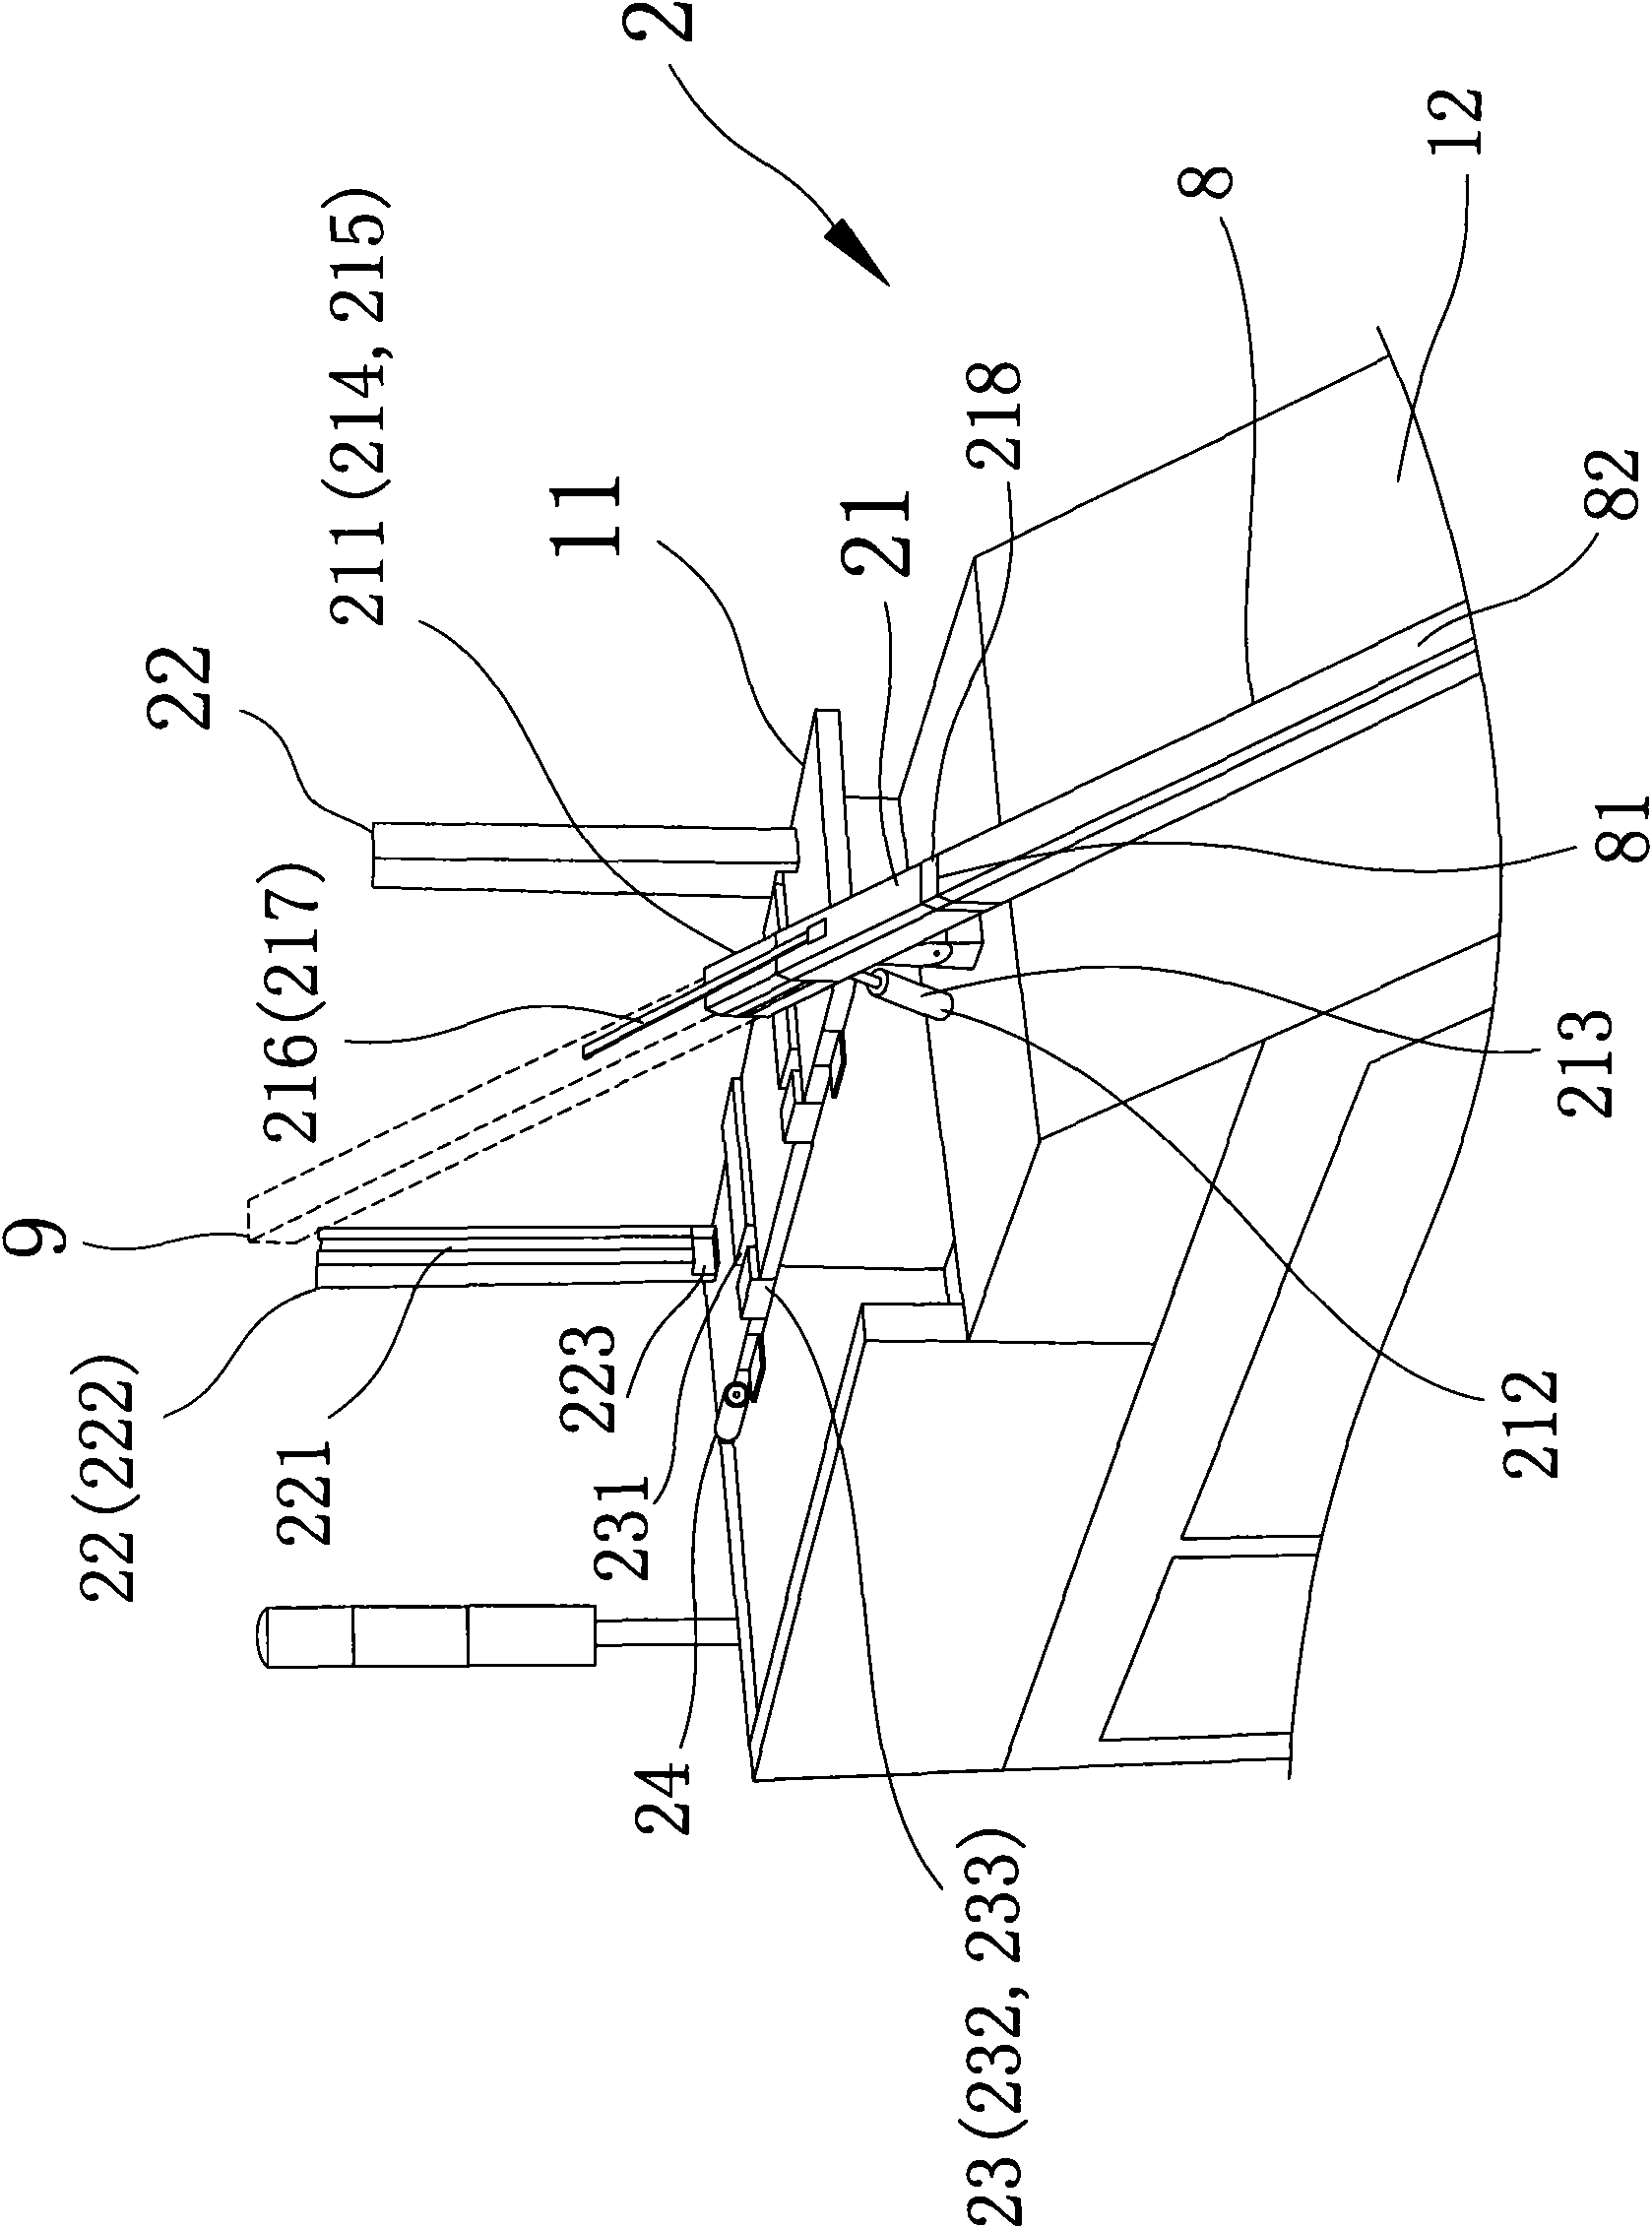 Chip issuing equipment and chip issuing system